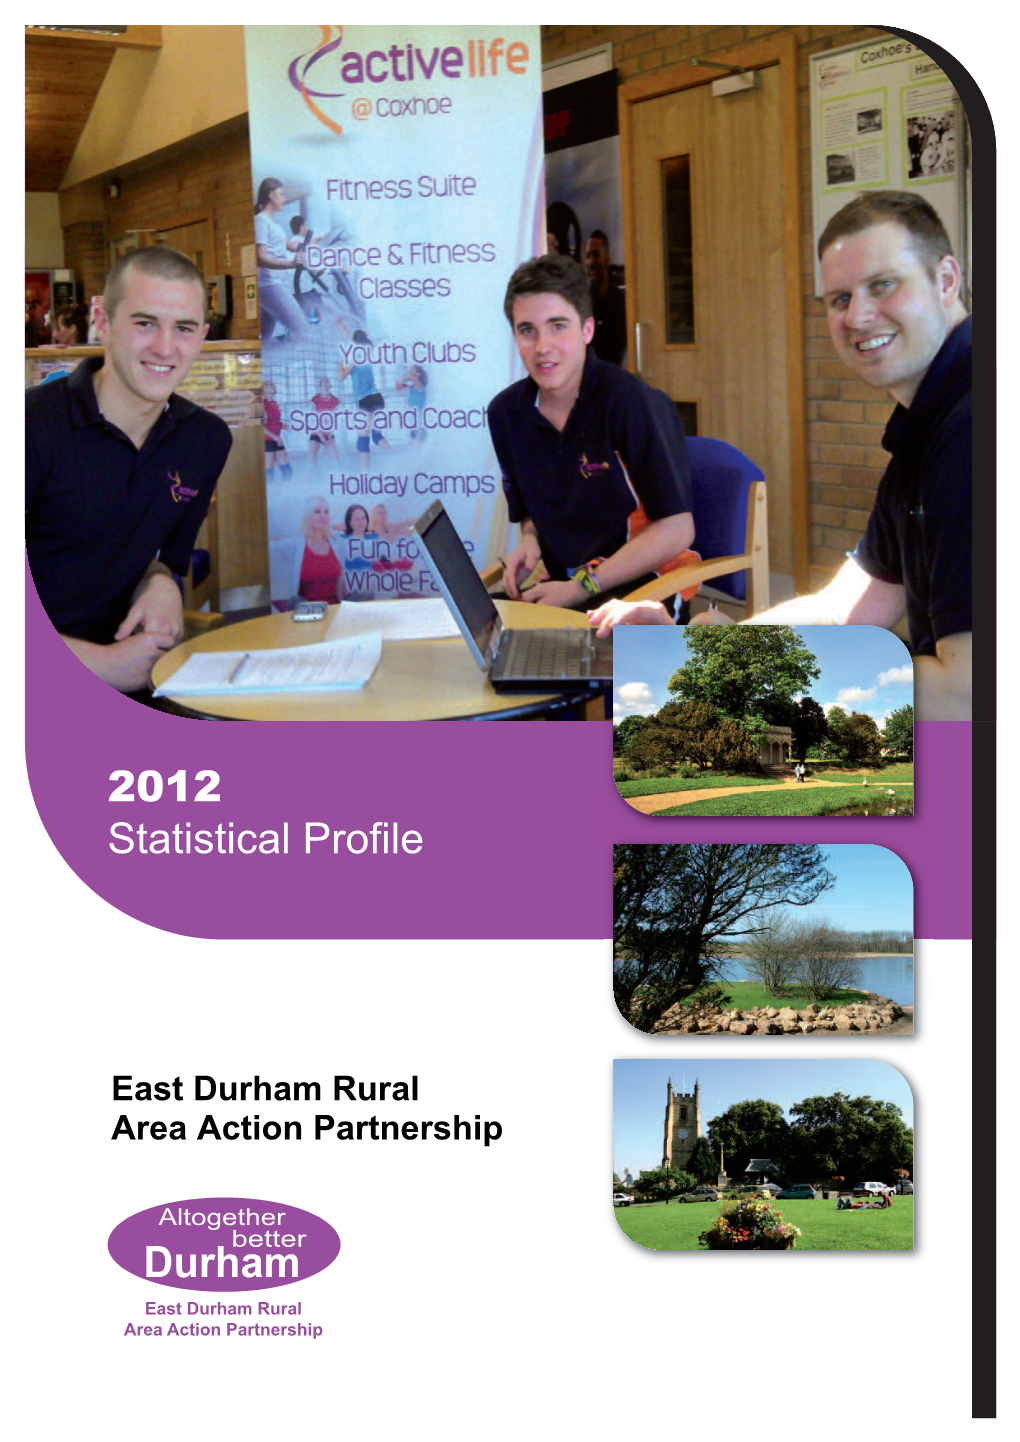 This Profile Pulls Together a Range of Indicators to Provide a Profile of the East Durham Rural Area Action Partnership (AAP) and of the People Who Live There